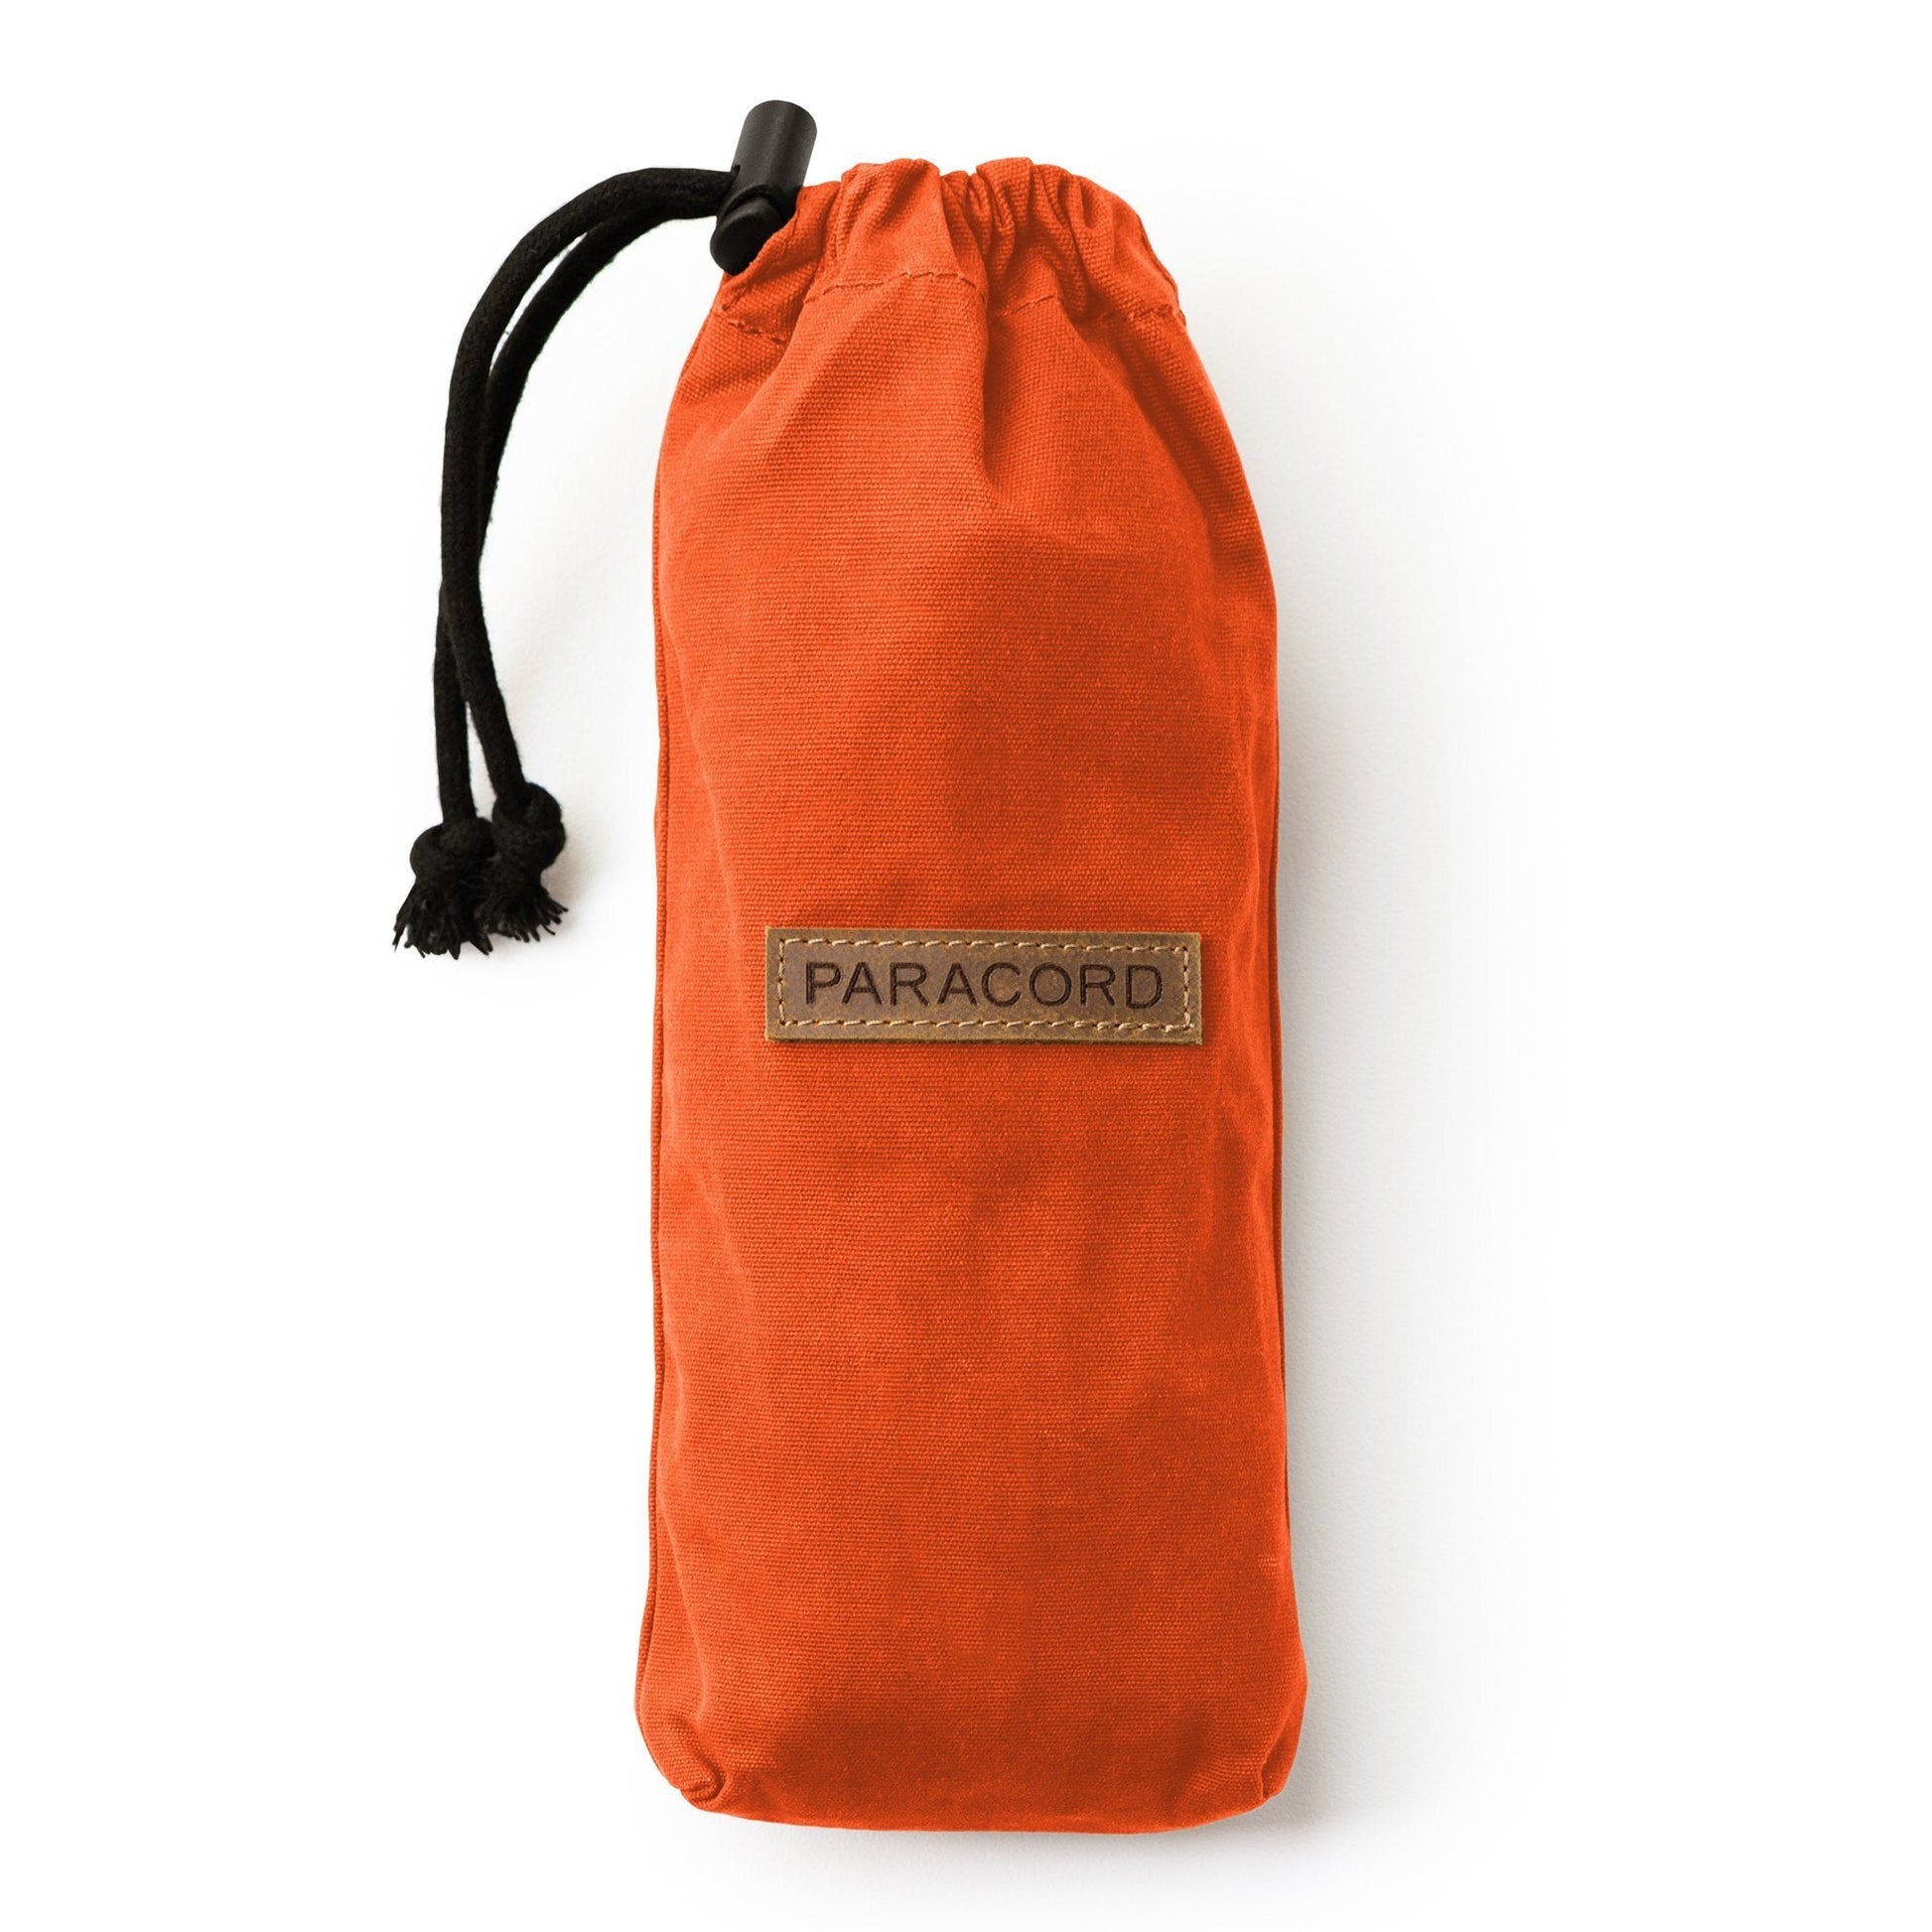 Orange Canvas Bushcraft Bag with a clearly visible brand label